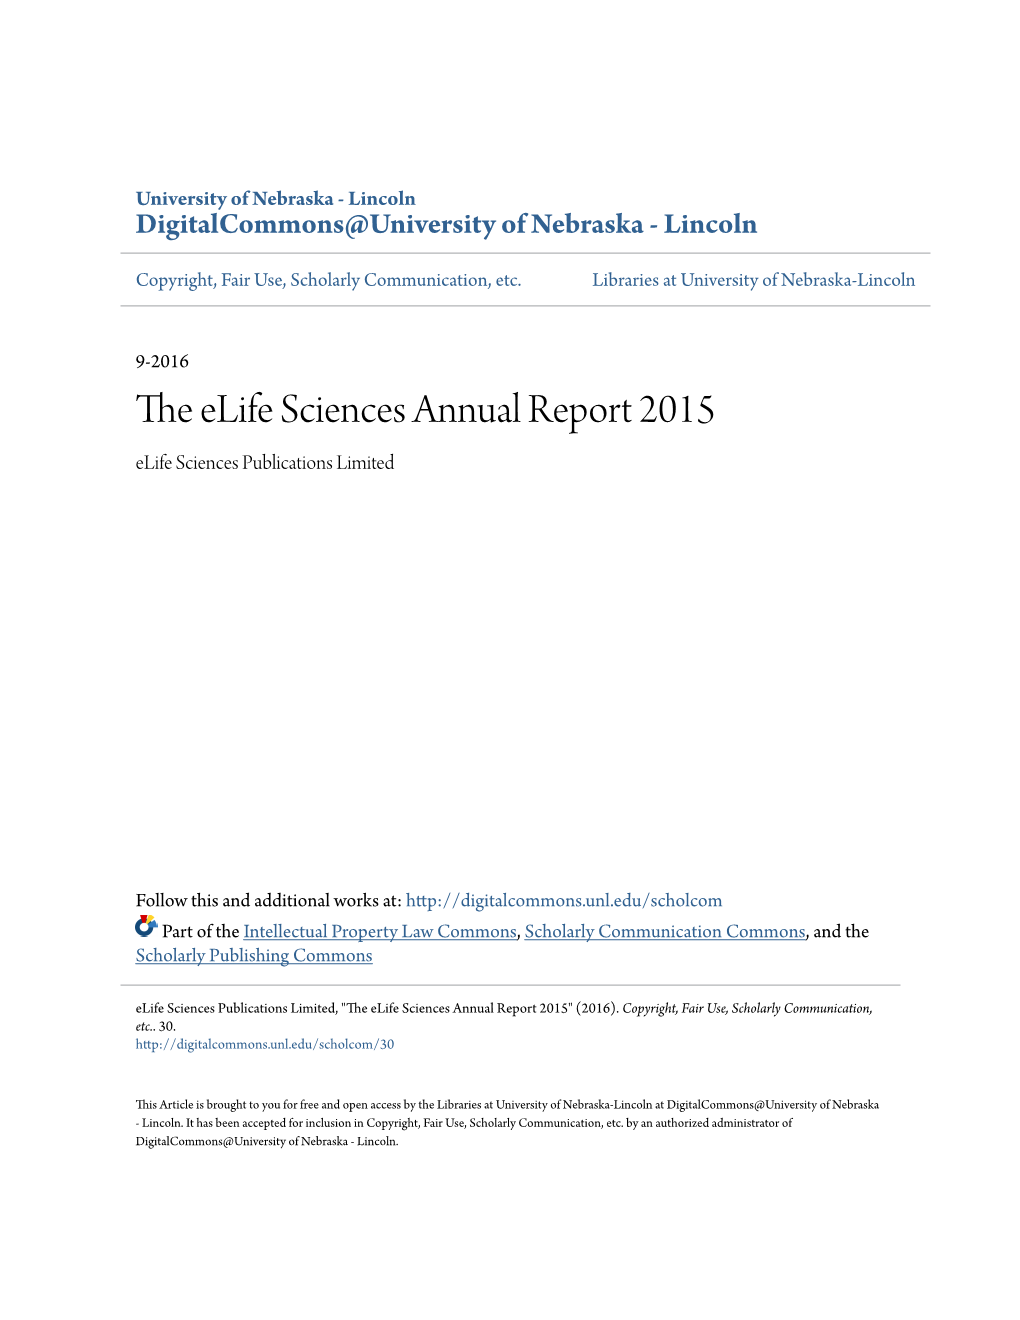 The Elife Sciences Annual Report 2015 Elife Sciences Publications Limited